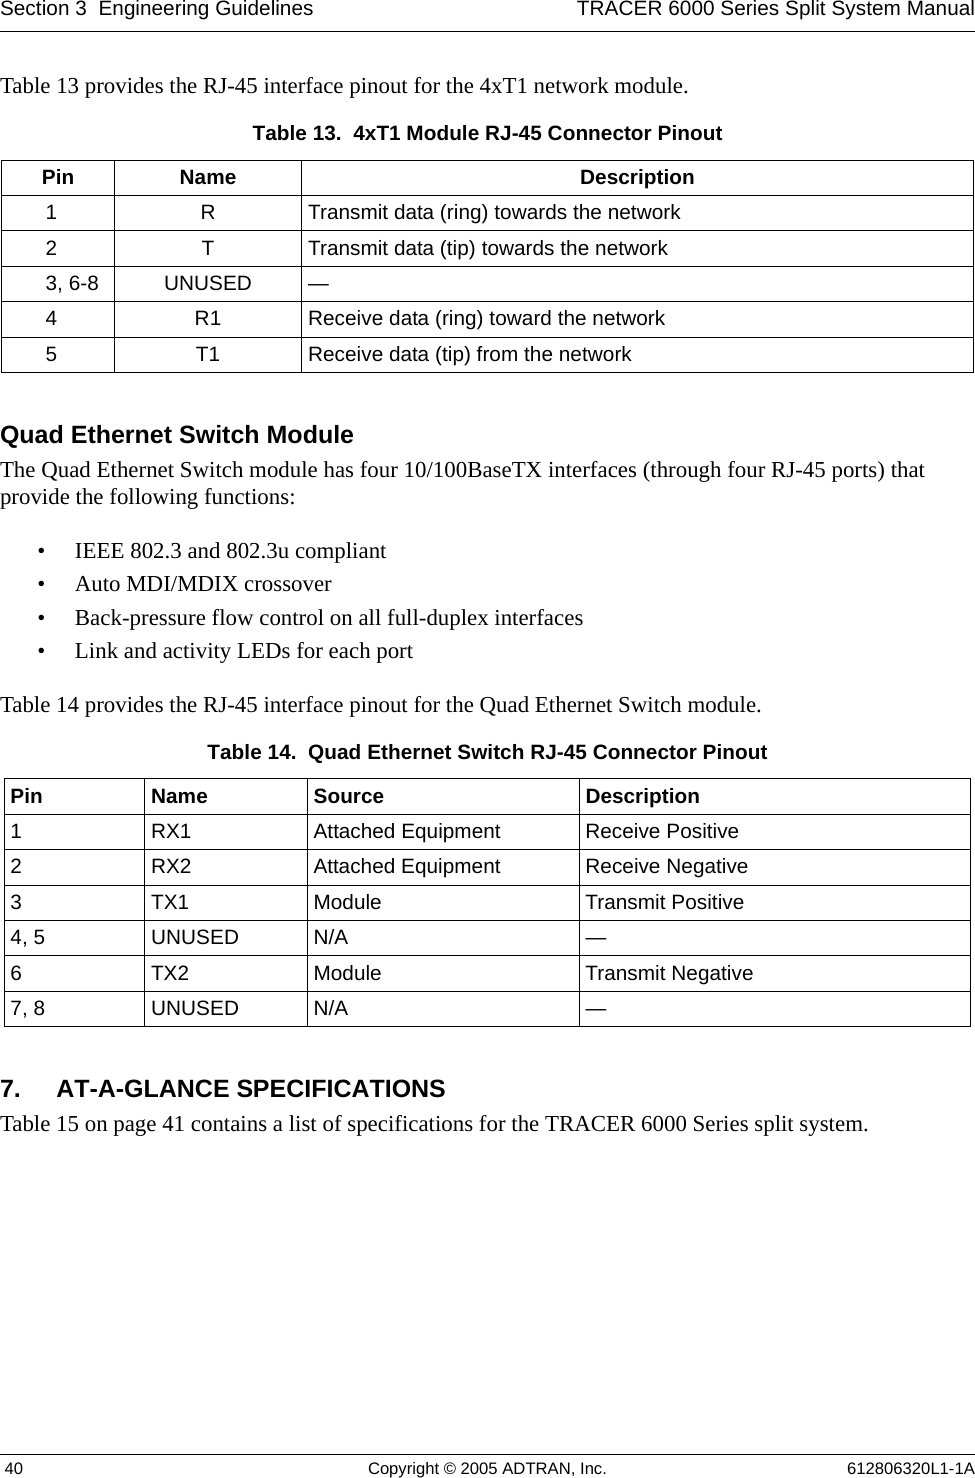 Section 3  Engineering Guidelines TRACER 6000 Series Split System Manual 40 Copyright © 2005 ADTRAN, Inc. 612806320L1-1ATable 13 provides the RJ-45 interface pinout for the 4xT1 network module. Quad Ethernet Switch ModuleThe Quad Ethernet Switch module has four 10/100BaseTX interfaces (through four RJ-45 ports) that provide the following functions:• IEEE 802.3 and 802.3u compliant• Auto MDI/MDIX crossover• Back-pressure flow control on all full-duplex interfaces• Link and activity LEDs for each portTable 14 provides the RJ-45 interface pinout for the Quad Ethernet Switch module.7. AT-A-GLANCE SPECIFICATIONSTable 15 on page 41 contains a list of specifications for the TRACER 6000 Series split system.Table 13.  4xT1 Module RJ-45 Connector Pinout Pin Name Description1 R Transmit data (ring) towards the network2 T Transmit data (tip) towards the network3, 6-8 UNUSED —4 R1 Receive data (ring) toward the network5 T1 Receive data (tip) from the networkTable 14.  Quad Ethernet Switch RJ-45 Connector Pinout Pin Name Source Description1 RX1 Attached Equipment Receive Positive2 RX2 Attached Equipment Receive Negative3 TX1 Module Transmit Positive4, 5 UNUSED N/A —6 TX2 Module Transmit Negative7, 8 UNUSED N/A —